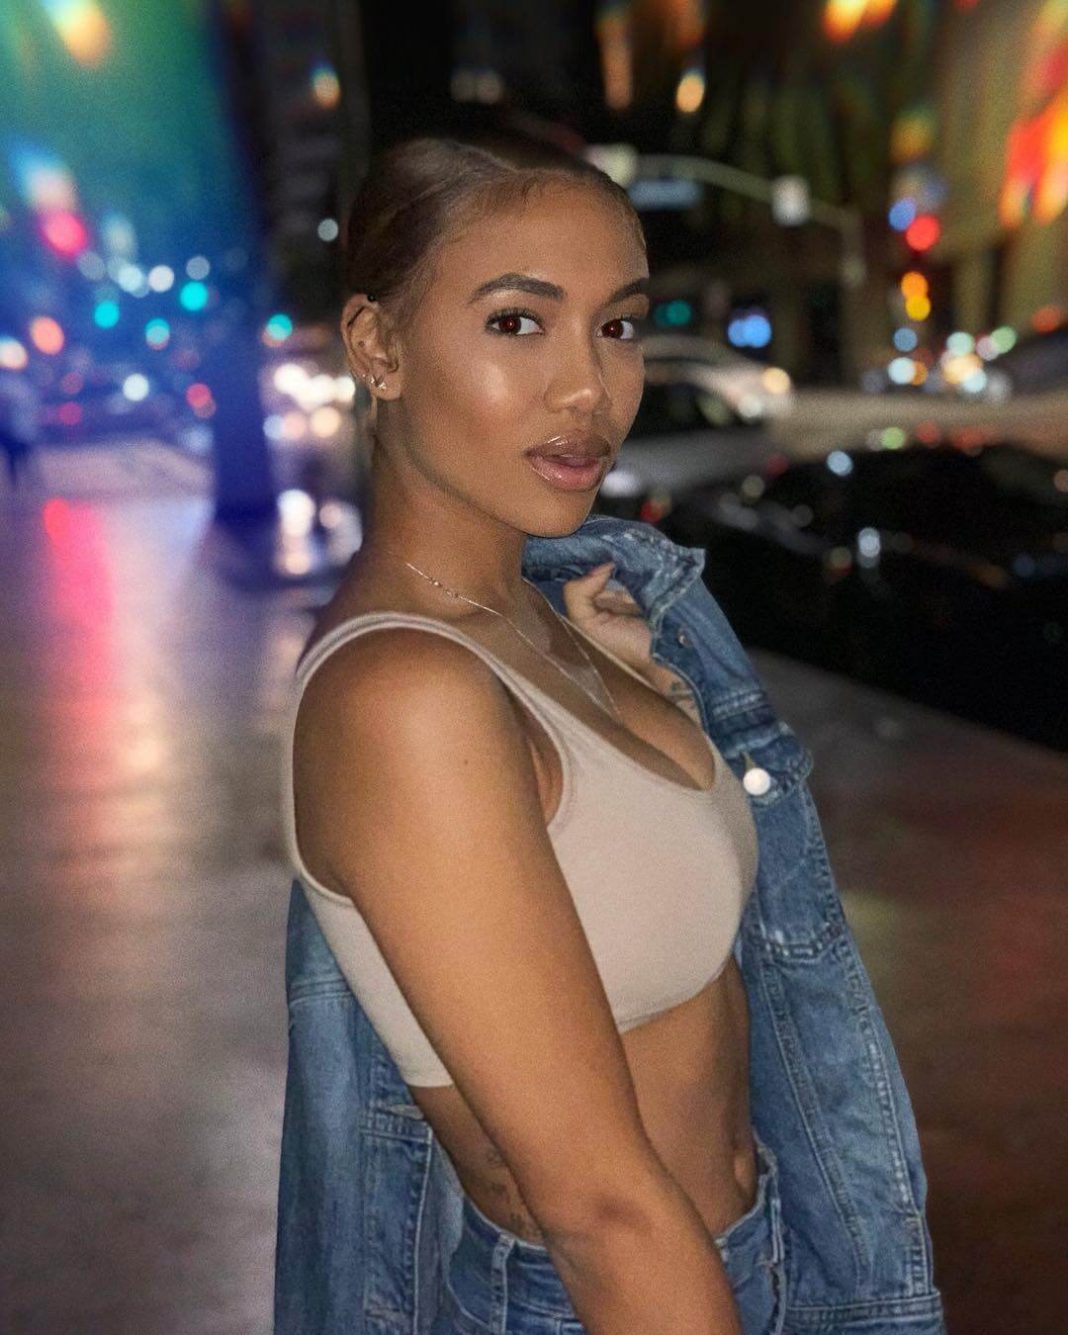 51 Paige Hurd Nude Pictures Which Makes Her An Enigmatic Glamor Quotient 220